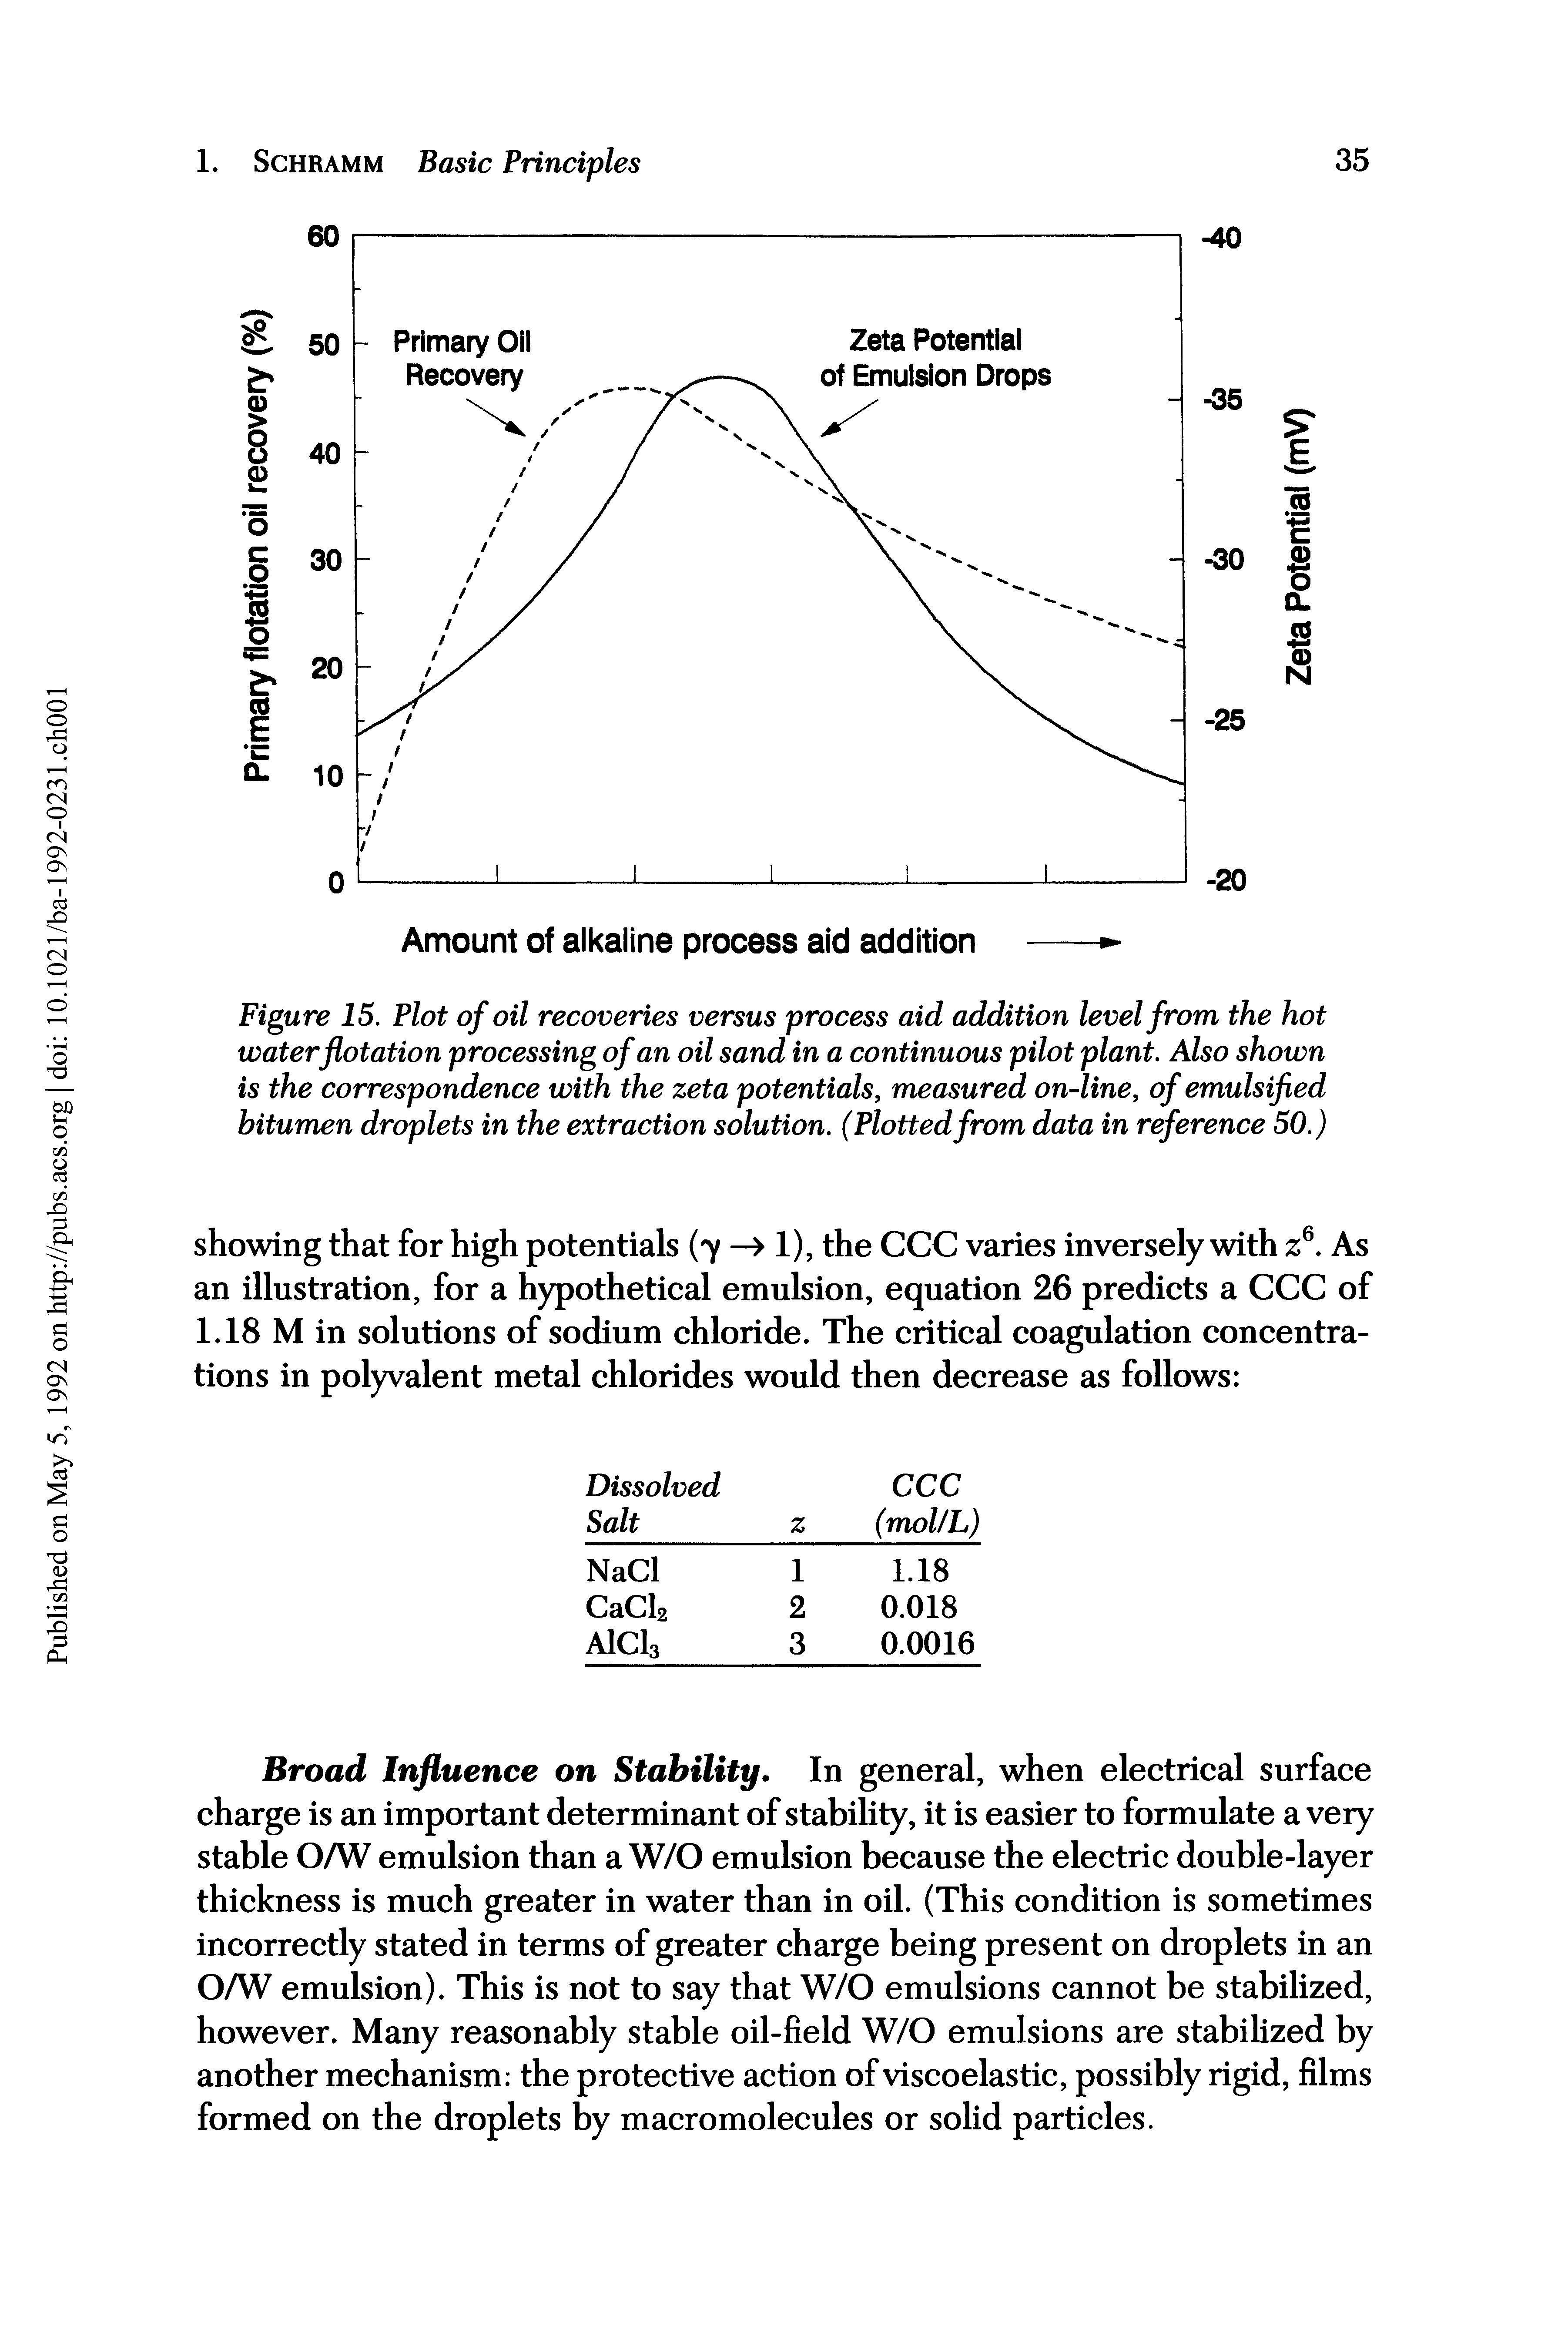 Figure 15. Plot of oil recoveries versus process aid addition level from the hot water flotation processing of an oil sand in a continuous pilot plant. Also shown is the correspondence with the zeta potentials, measured on-line, of emulsified bitumen droplets in the extraction solution. (Plotted from data in reference 50.)...